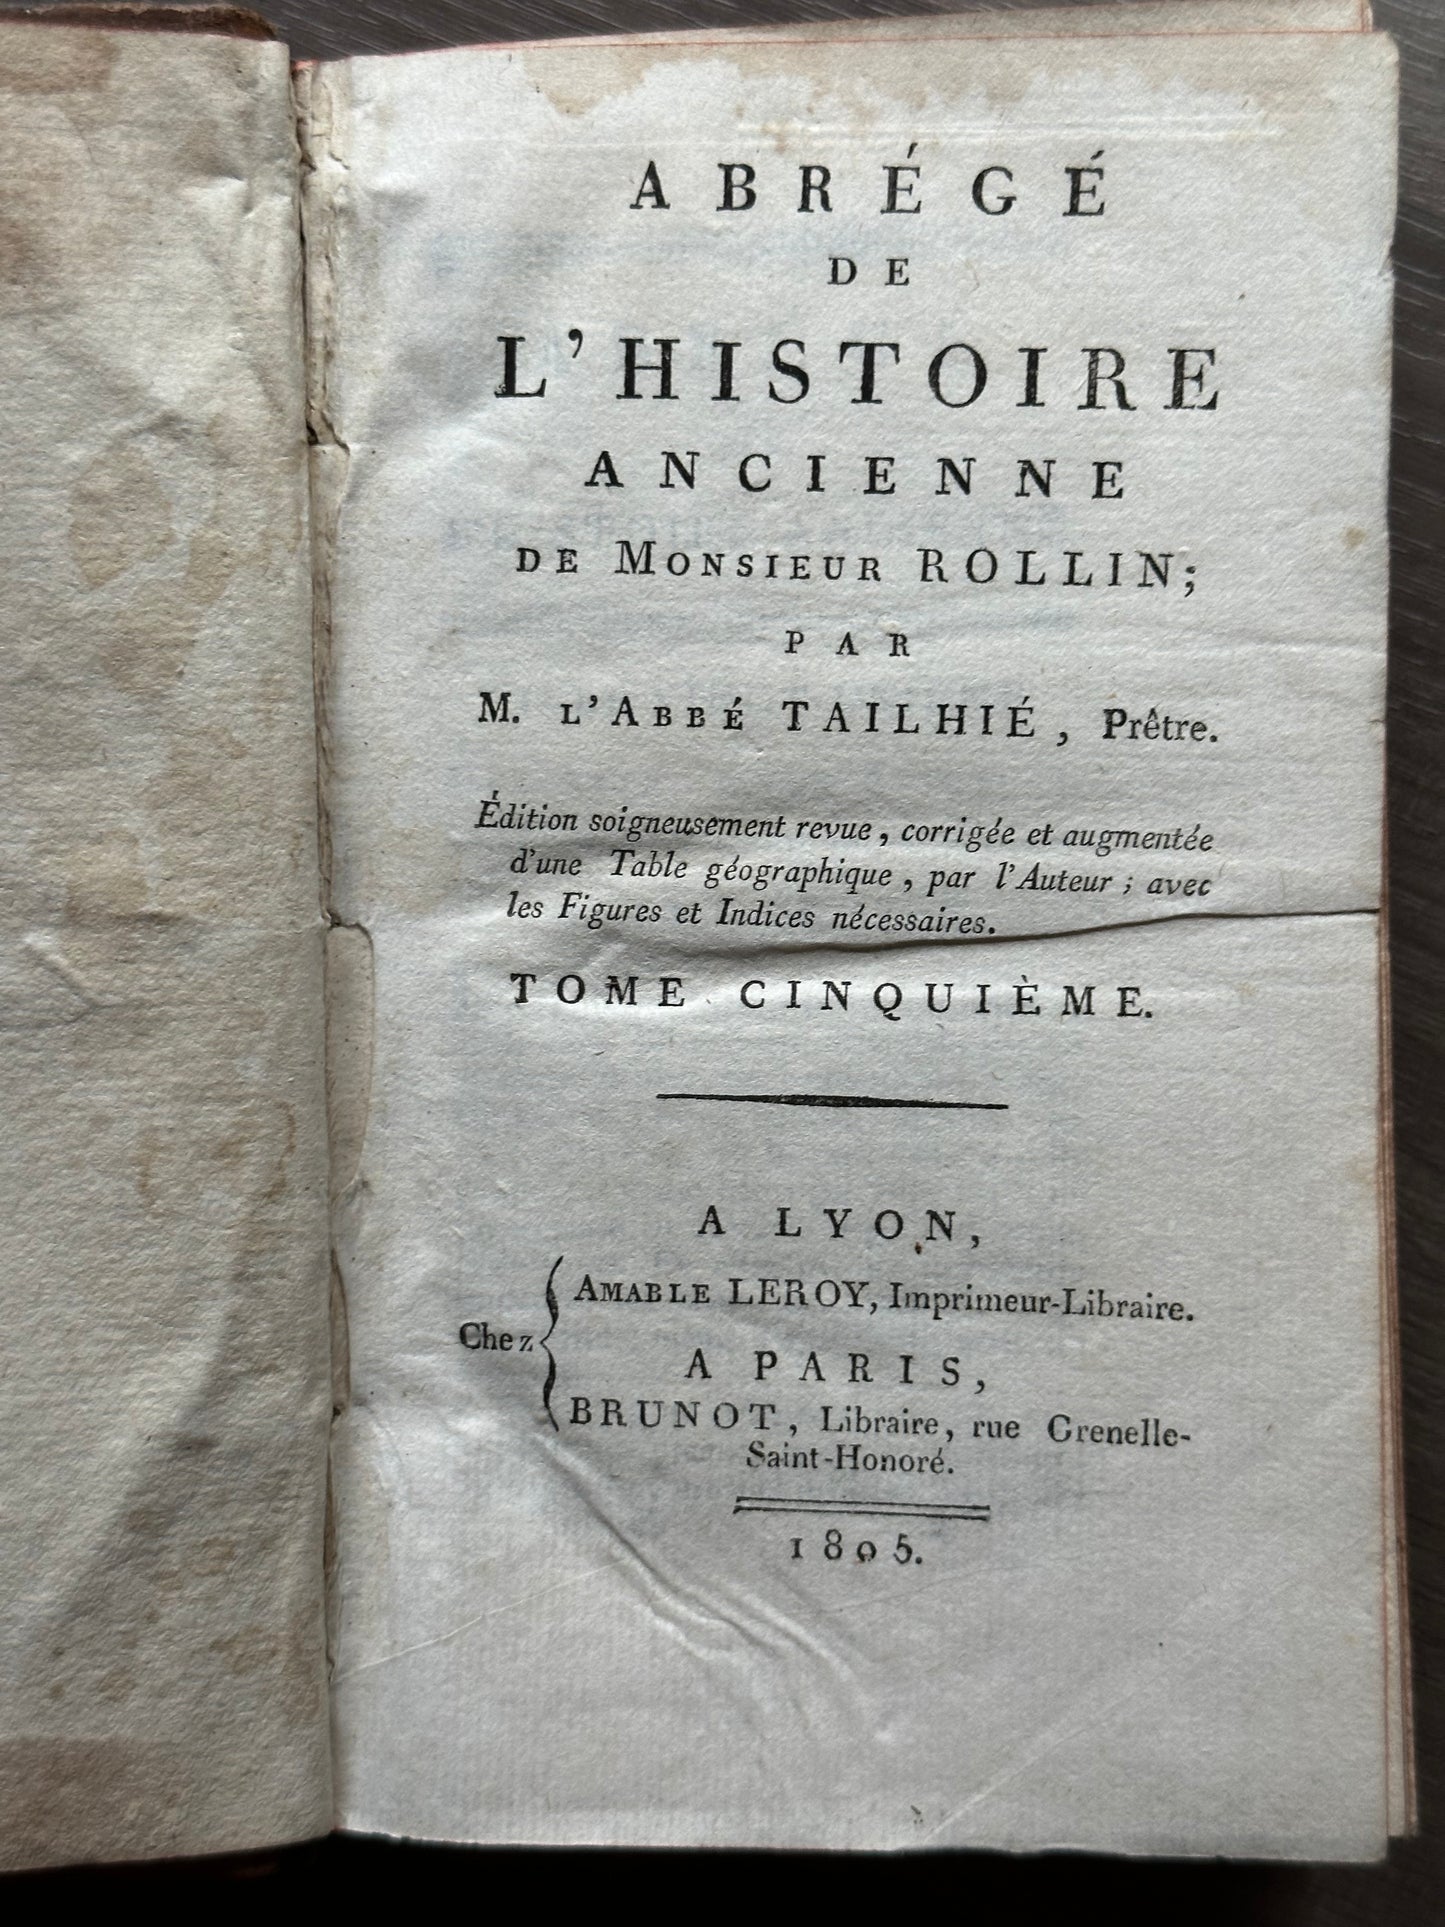 1805 Abbreviated History of the Ancient World